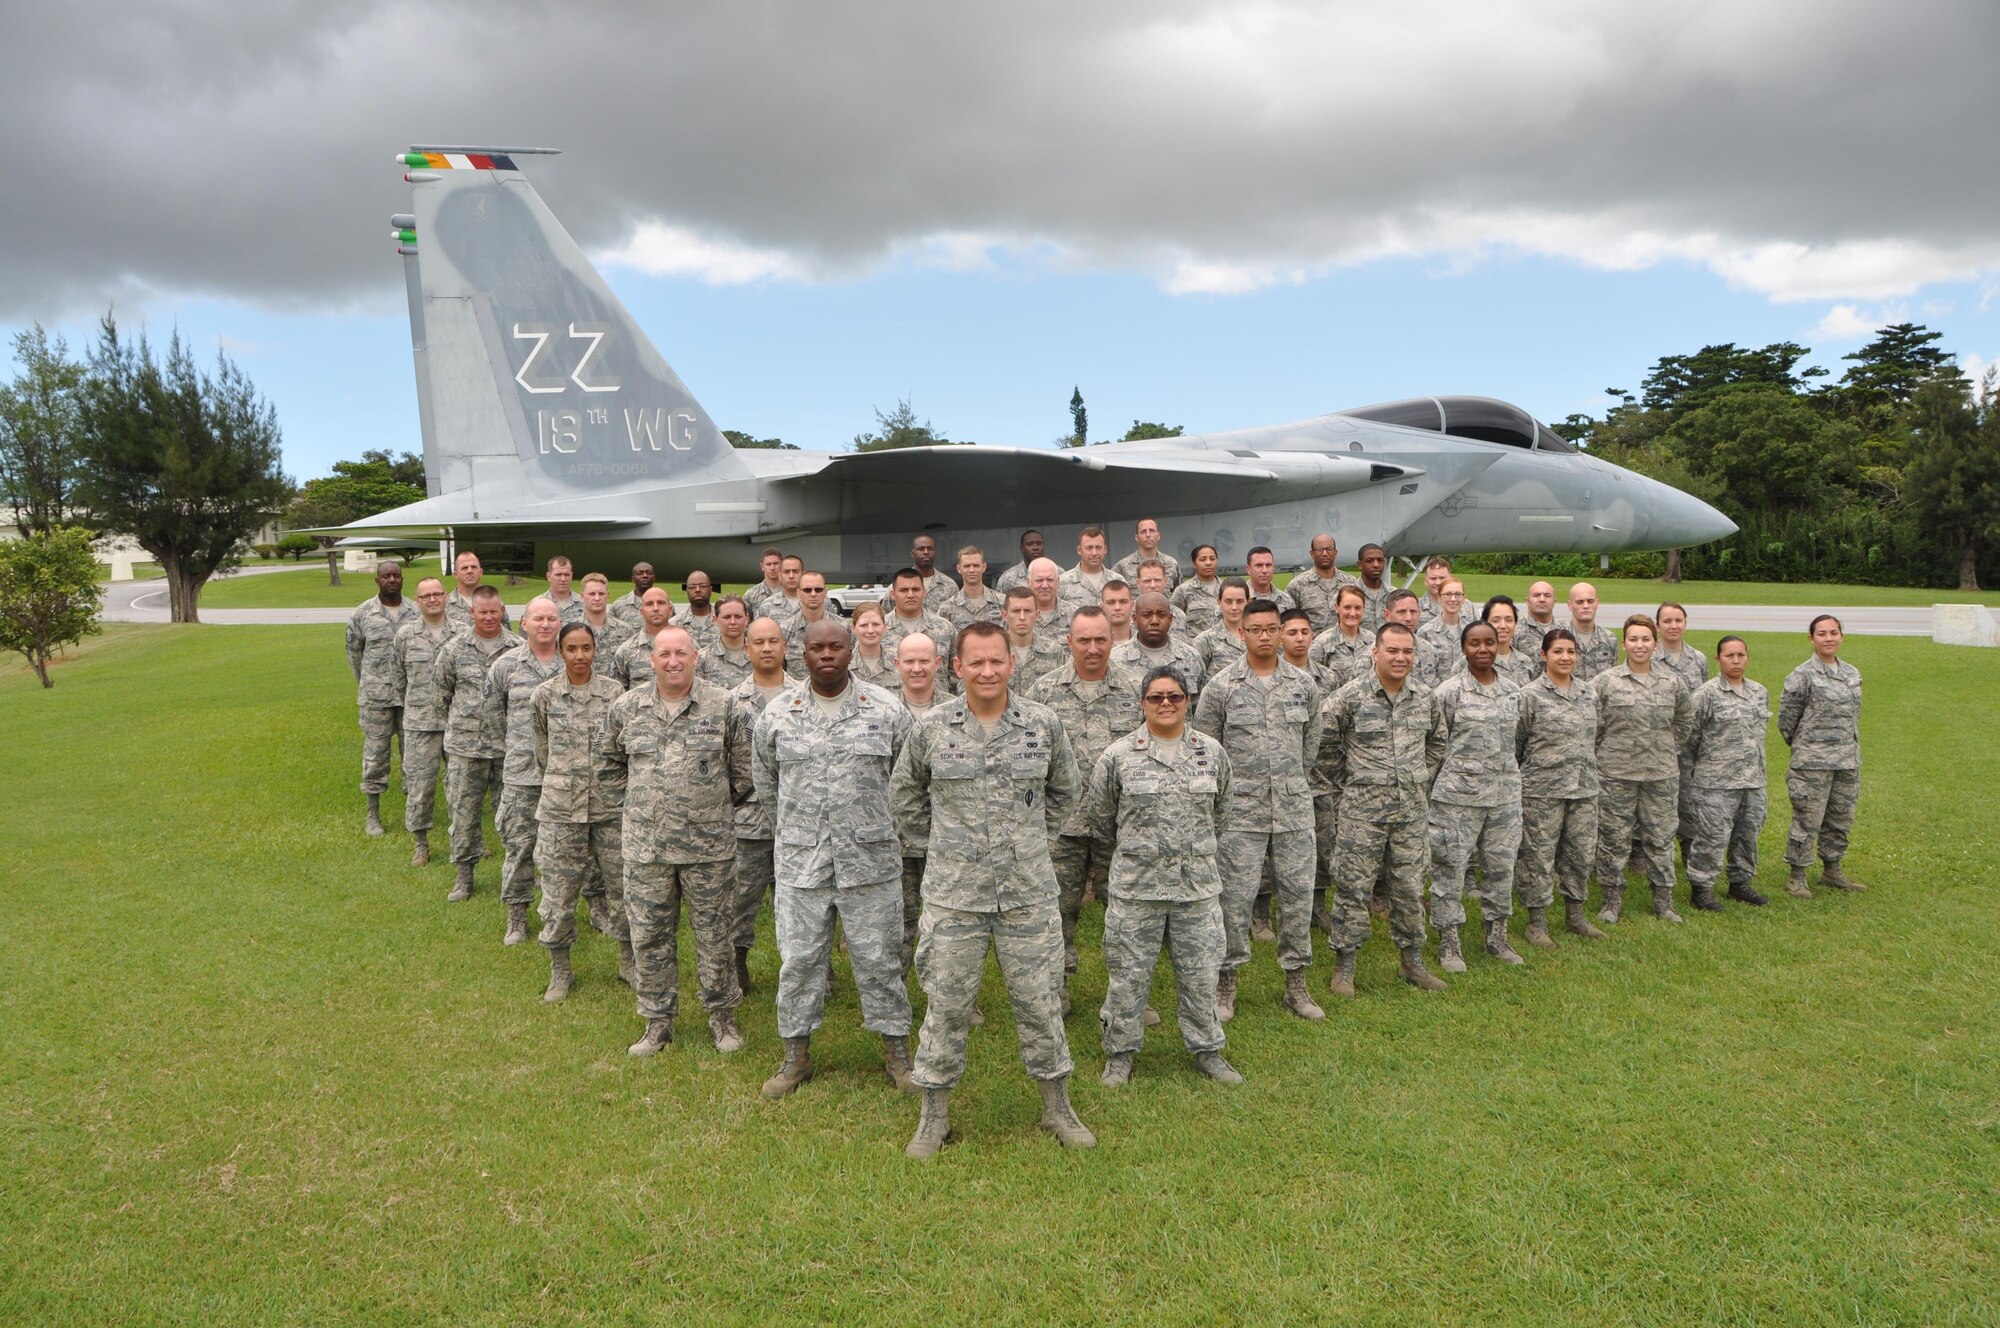 Members of the 944th Logistics Readiness Squadron pose for a unit photo during their two week annual tour trip to Kadena Air Base, Japan. Citizen Airmen were given the opportunity to serve alongside Active Duty counter parts at the 18th Wing.  The significance of an off station AT proved to be invaluable for both wings.  